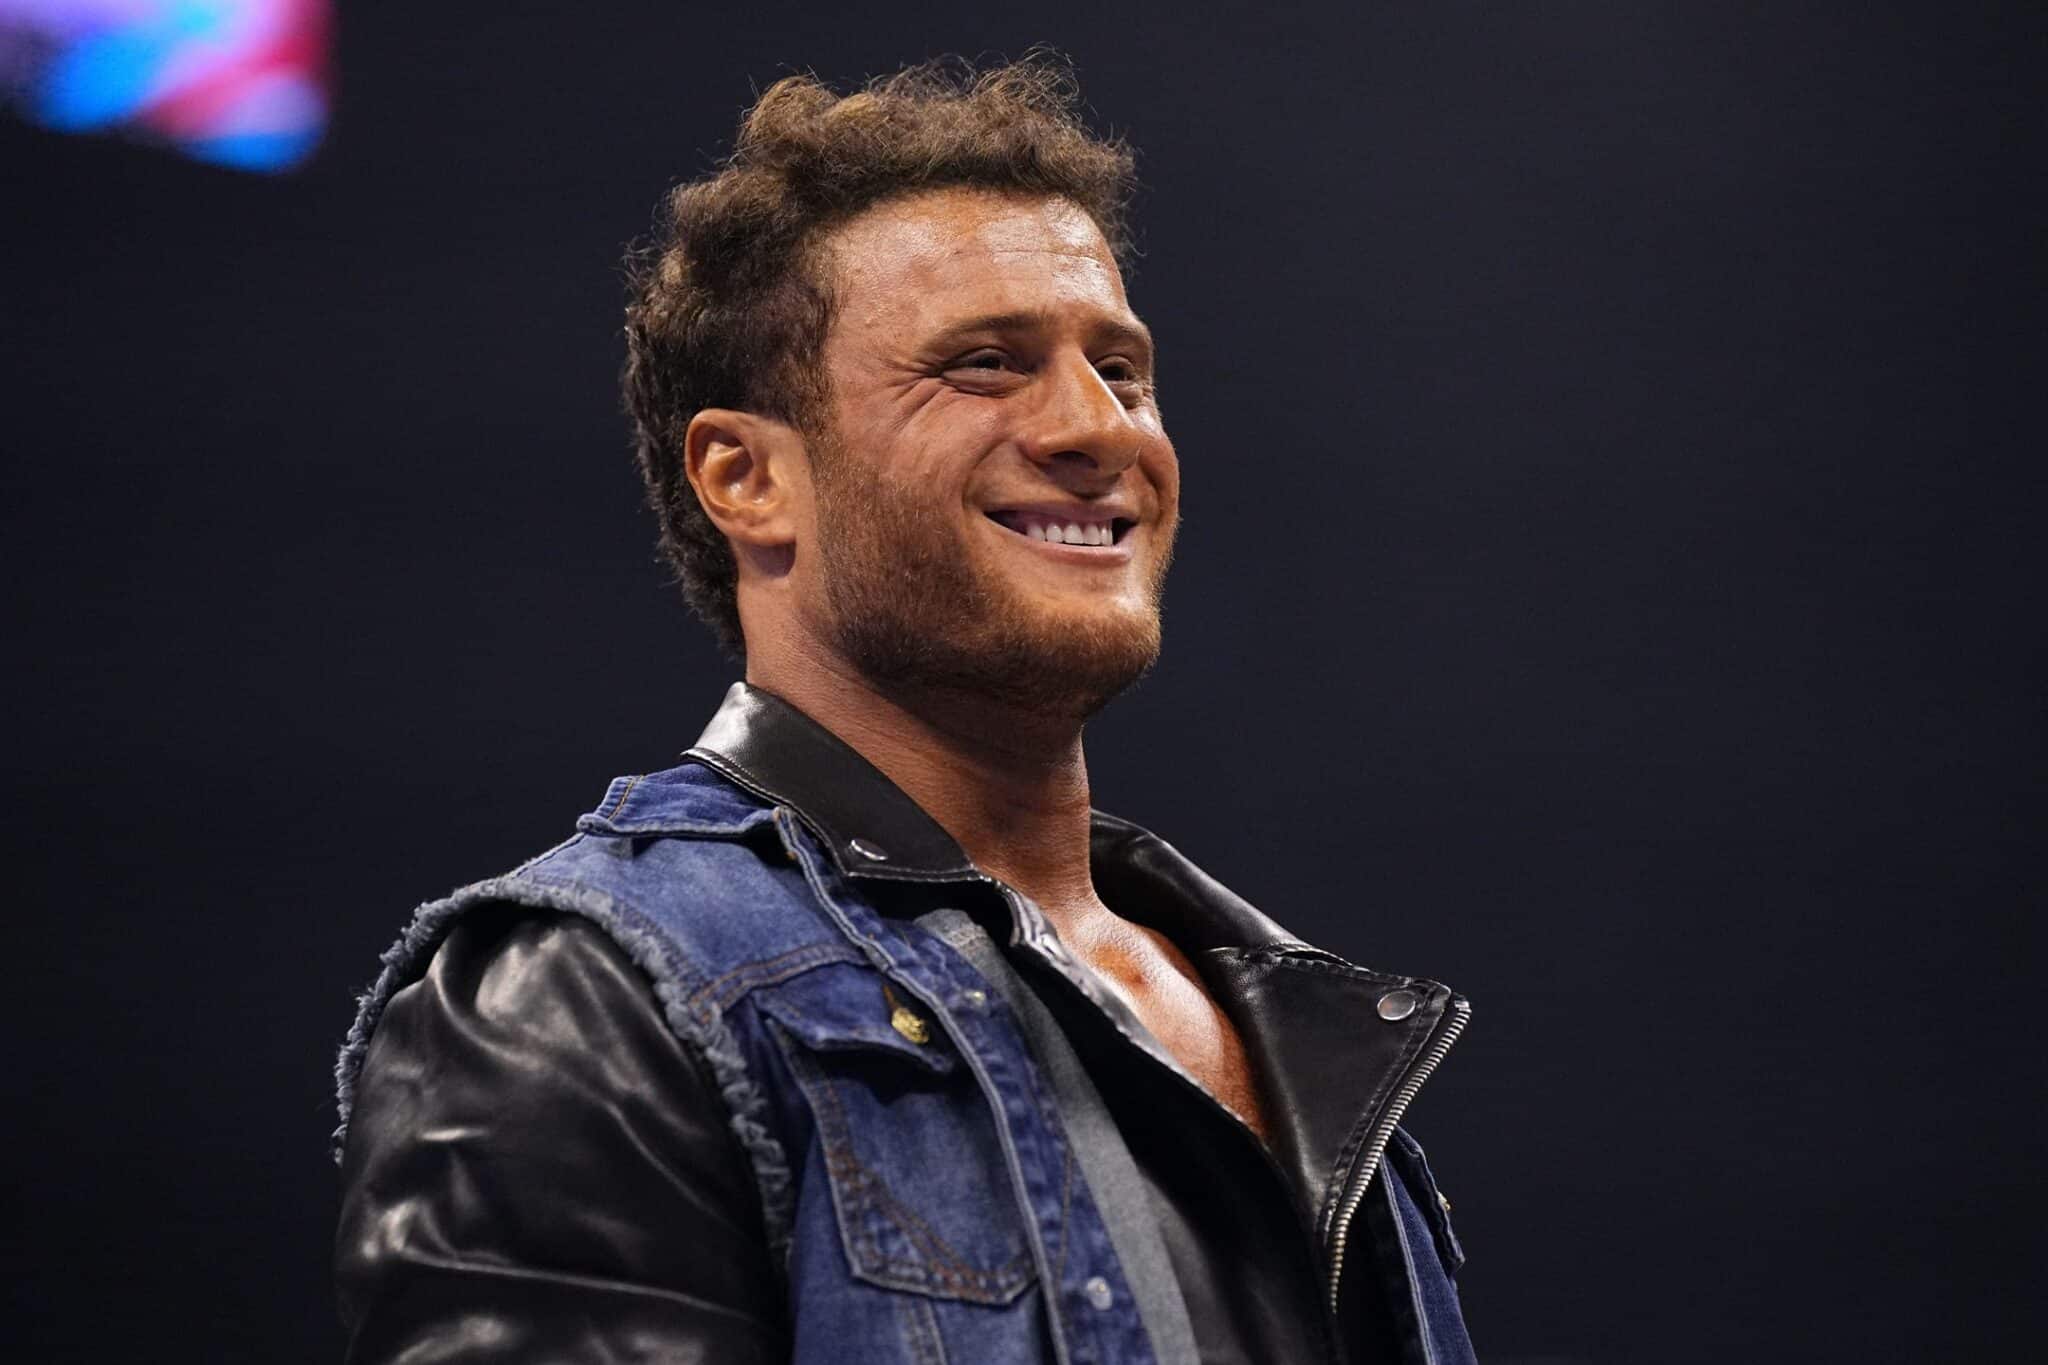 MJF’s Denim Jacket Acknowledged as a Nod to Triple H